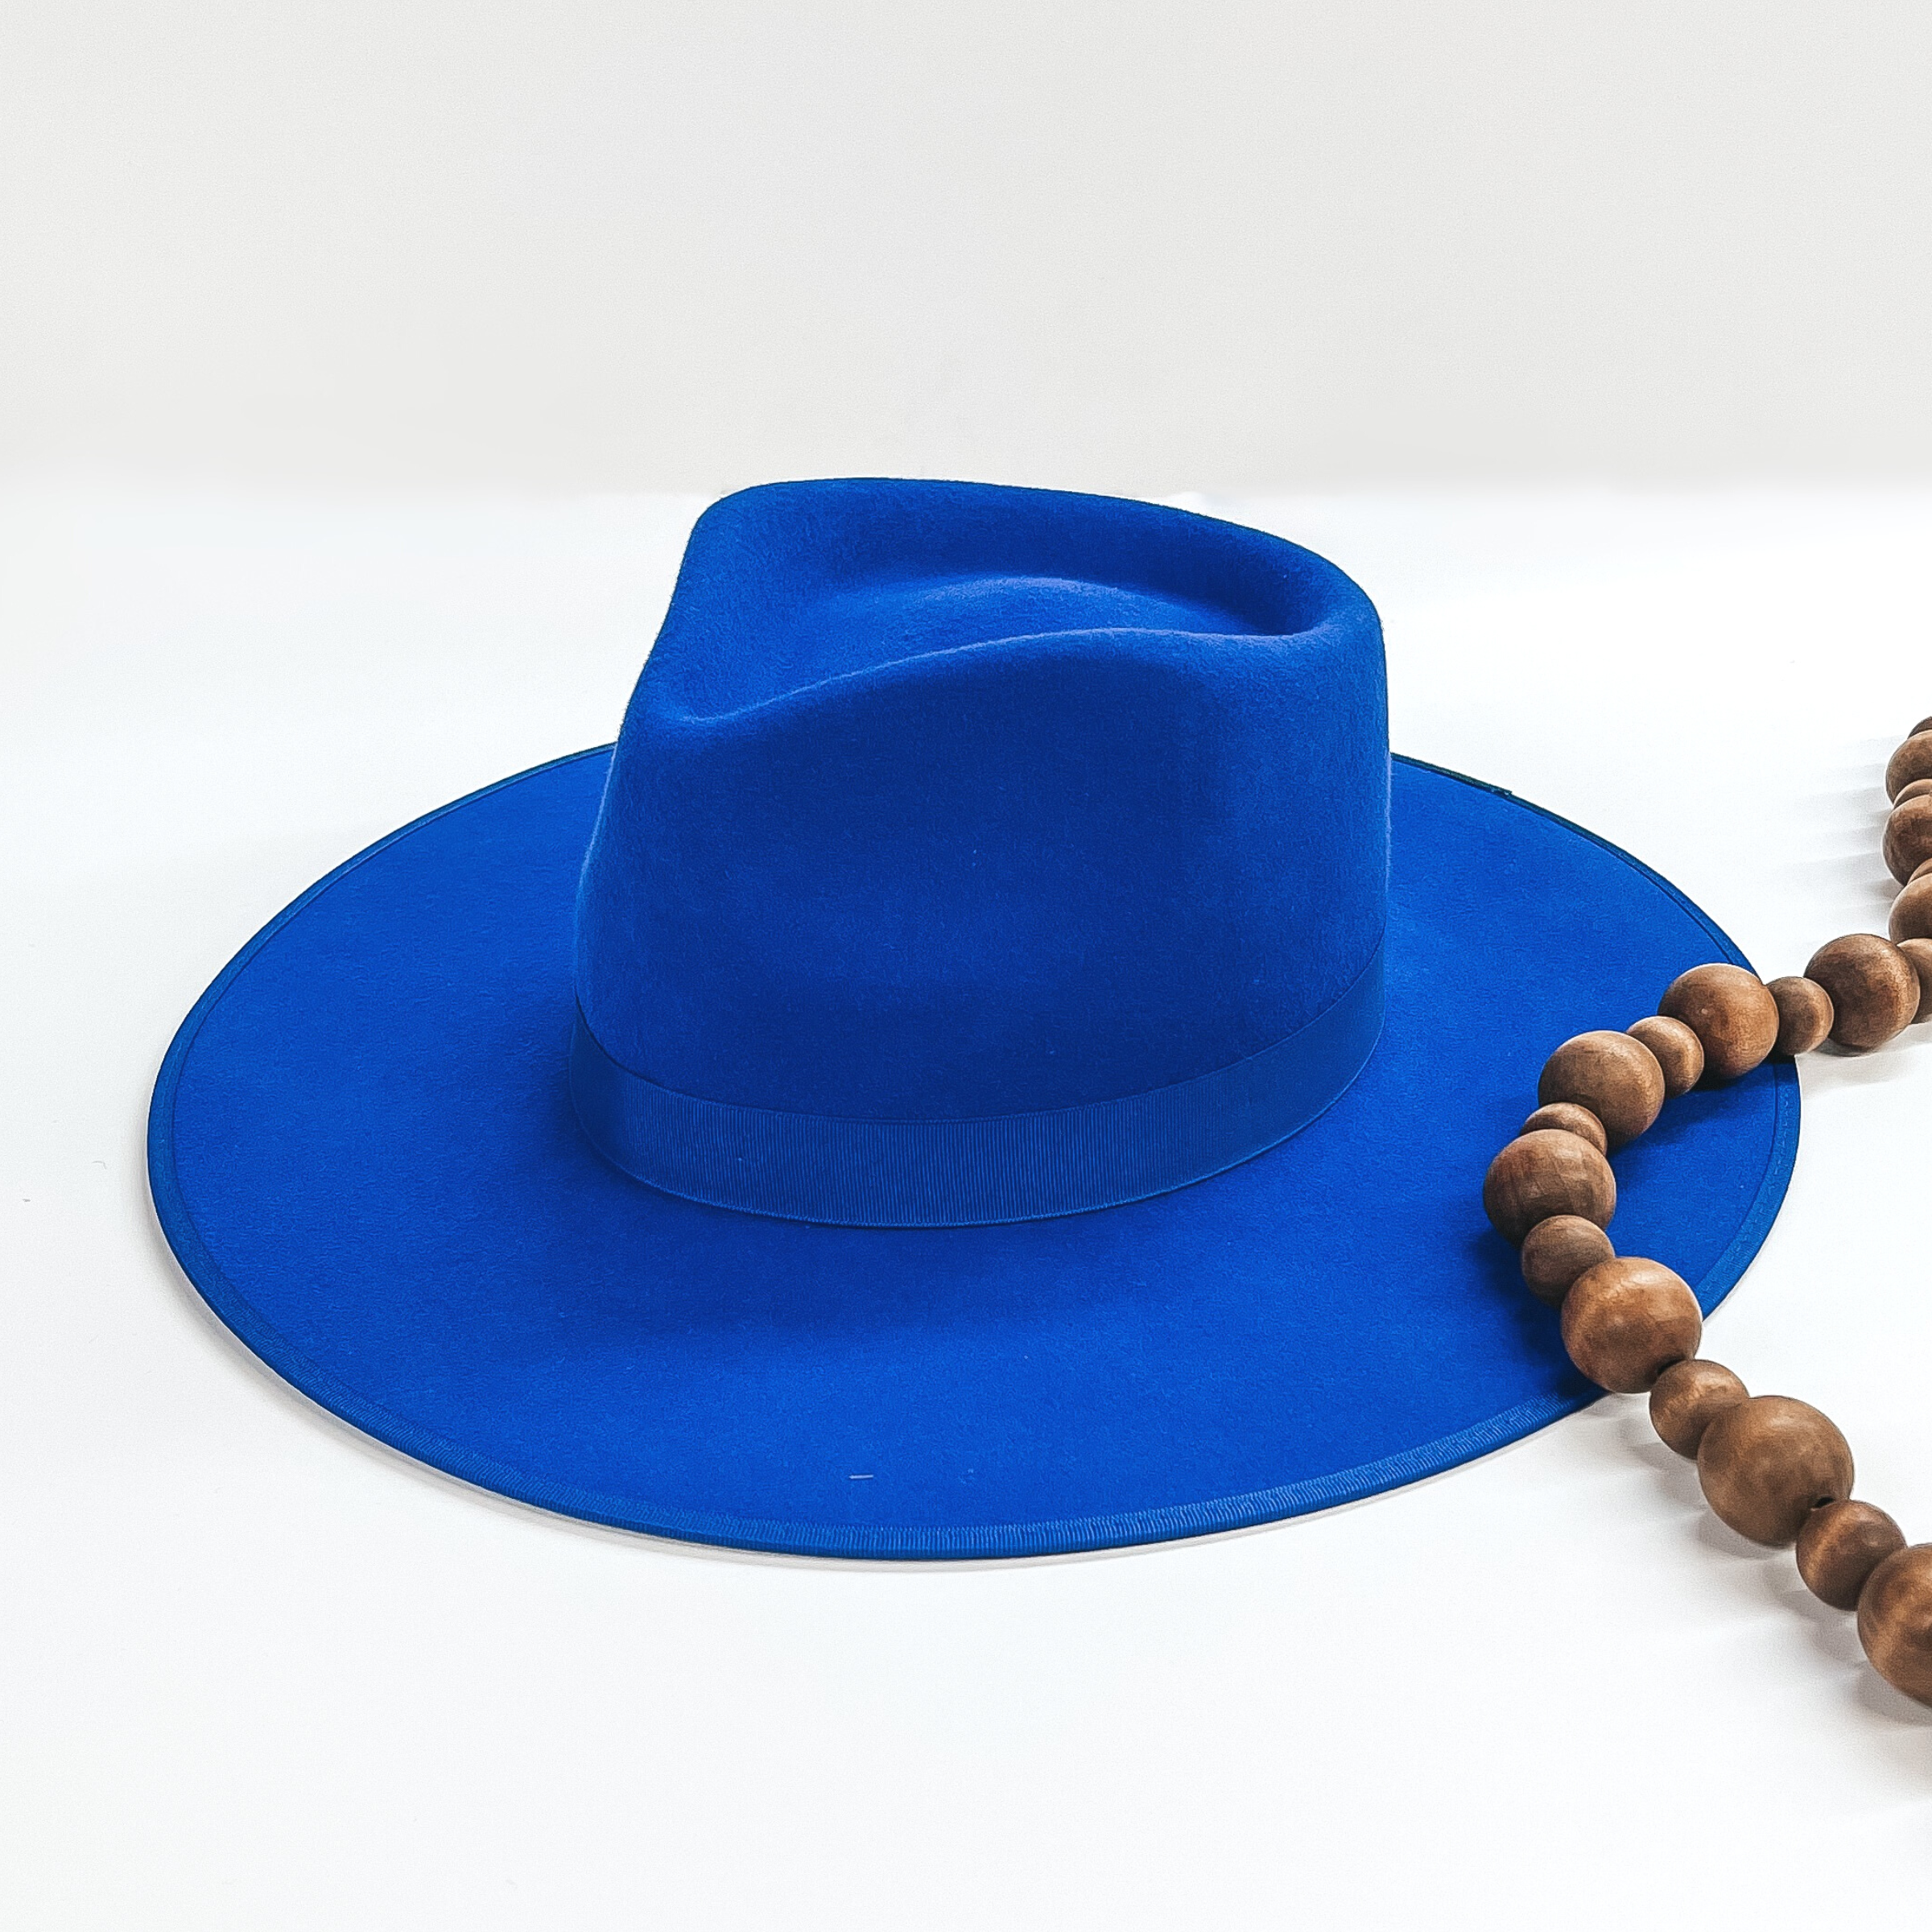 Royal blue felt hat with a structured top and a flat brim. This has includes a royal blue ribbon hat band. This hat is pictured on a white background with brown decorative beads.